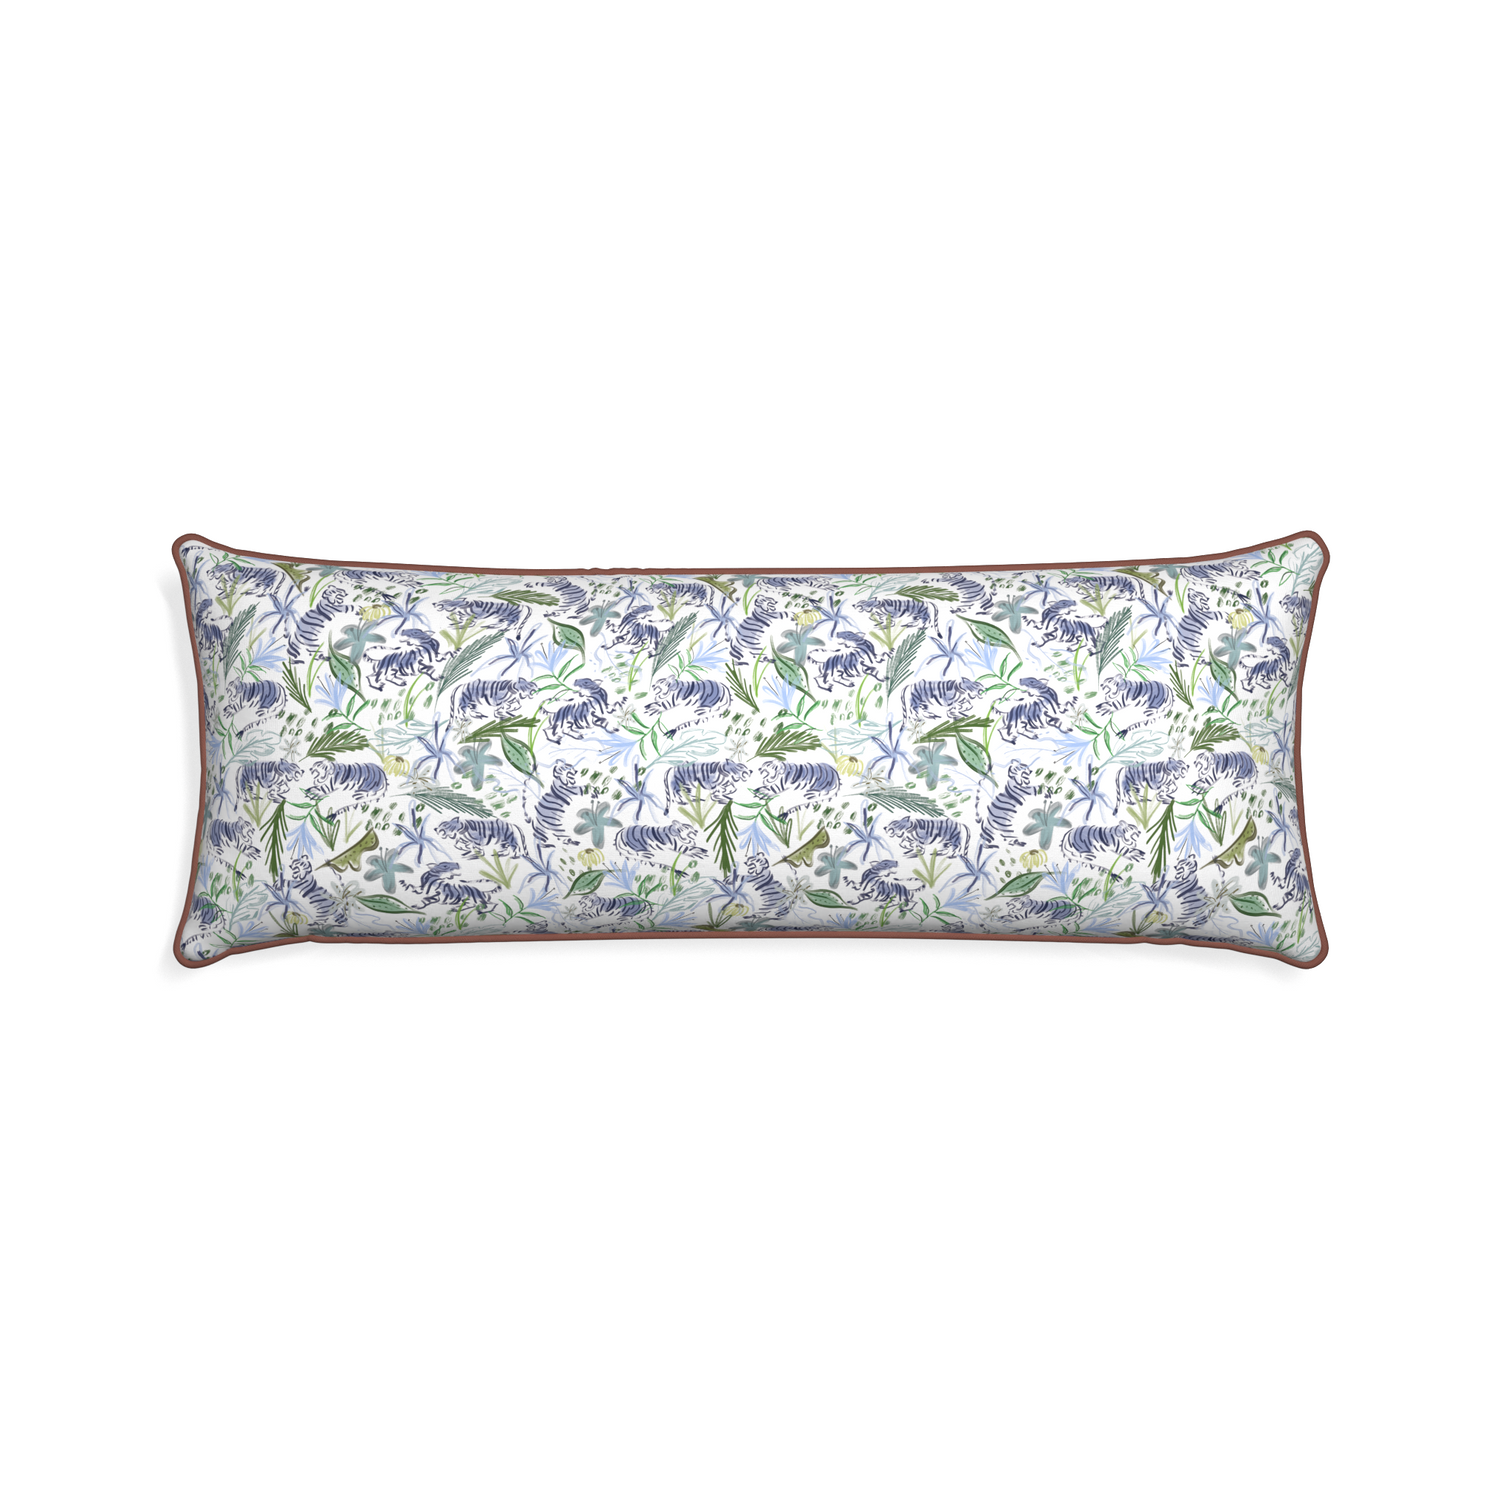 Xl-lumbar frida green custom green tigerpillow with w piping on white background